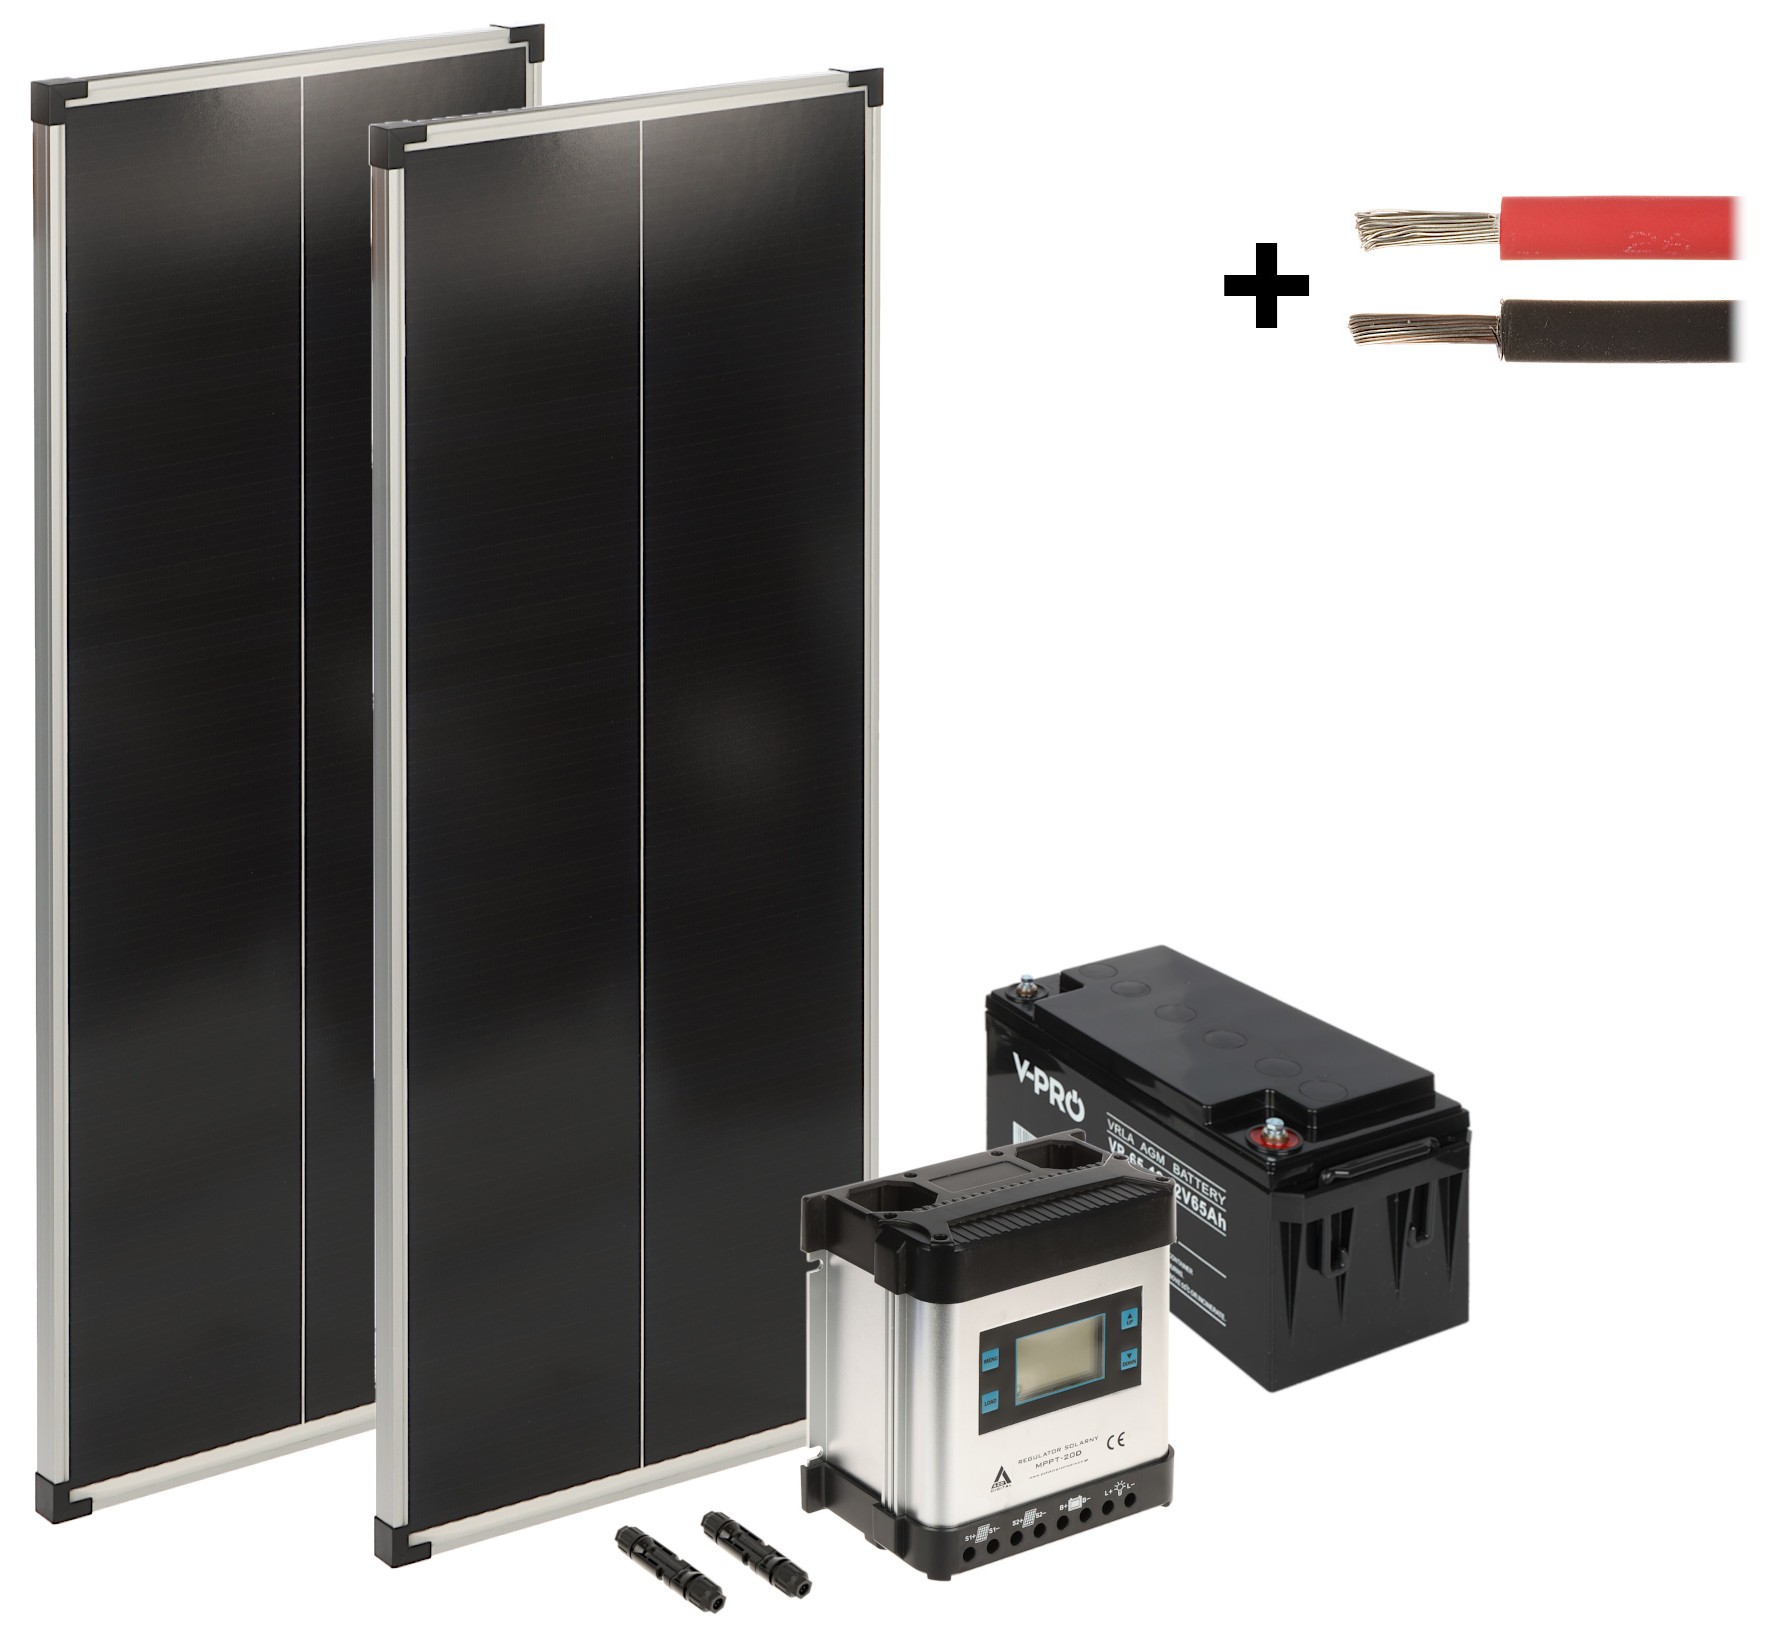 kit panouri fotovoltaice pret consum 10 kw in 24h Kit panouri fotovoltaice + controller + acumulator SP-KIT-2X100/65/MPPT-LCD 540 Wh